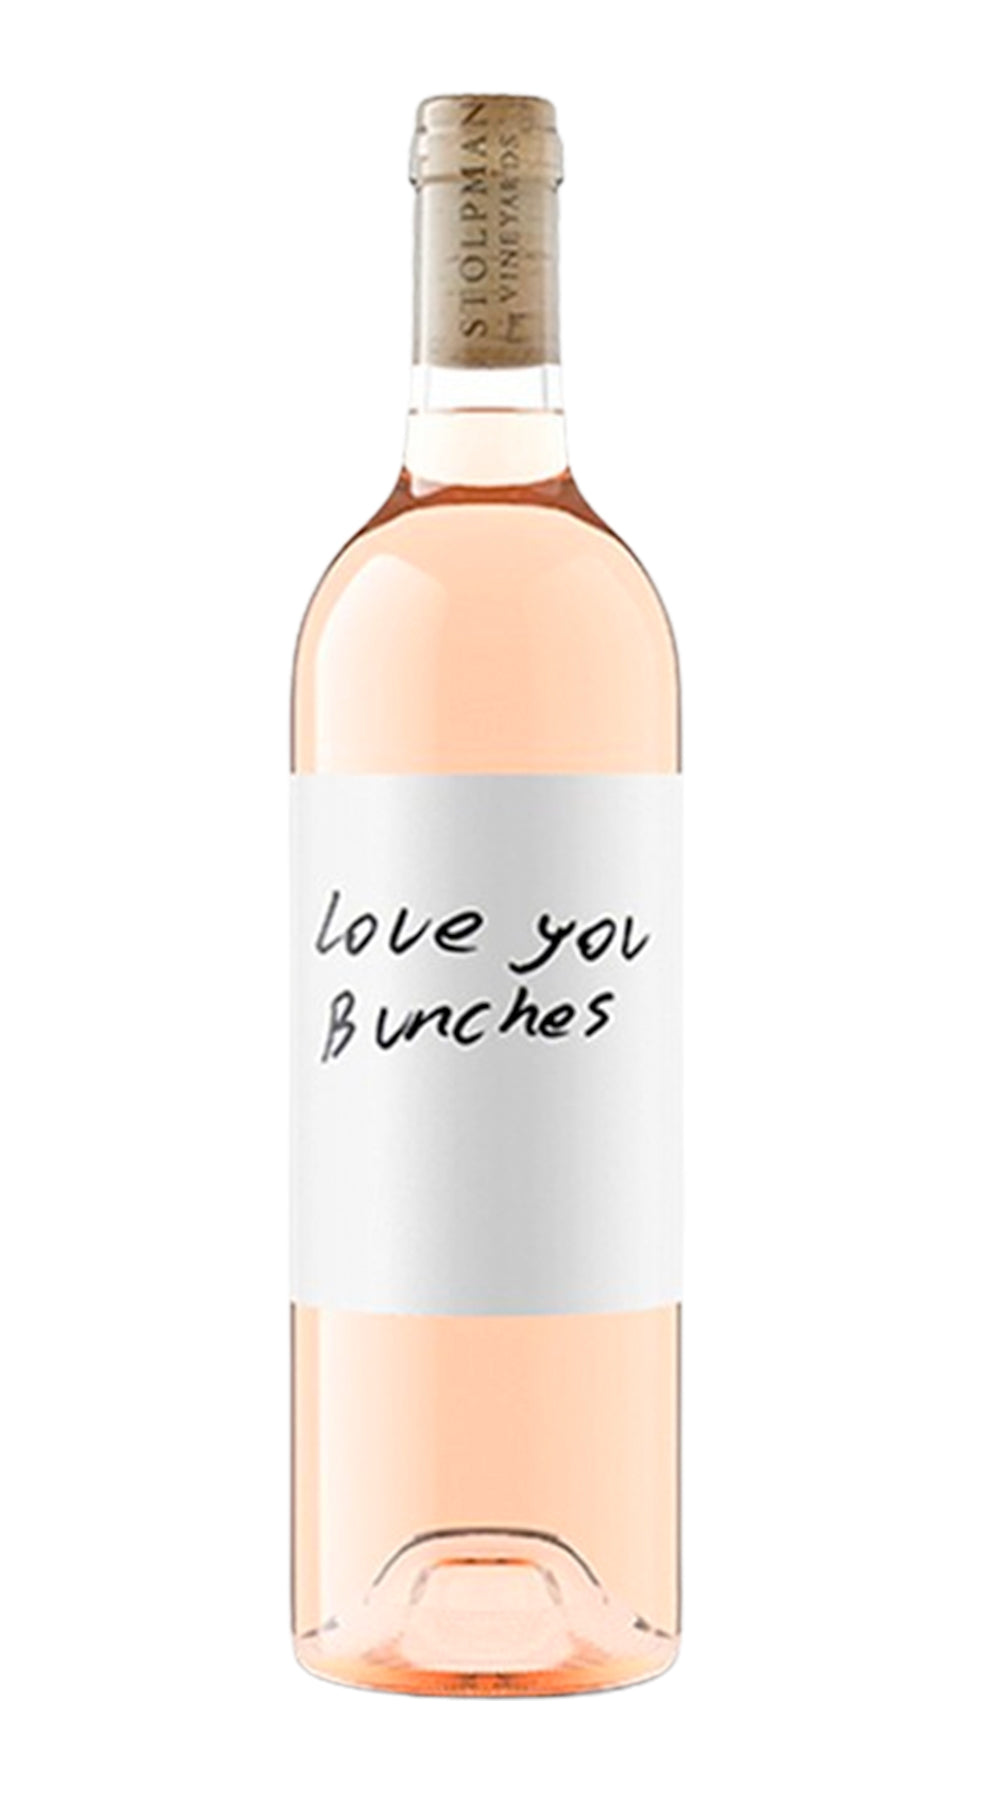 Stolpman Rosé 'Love you Bunches'